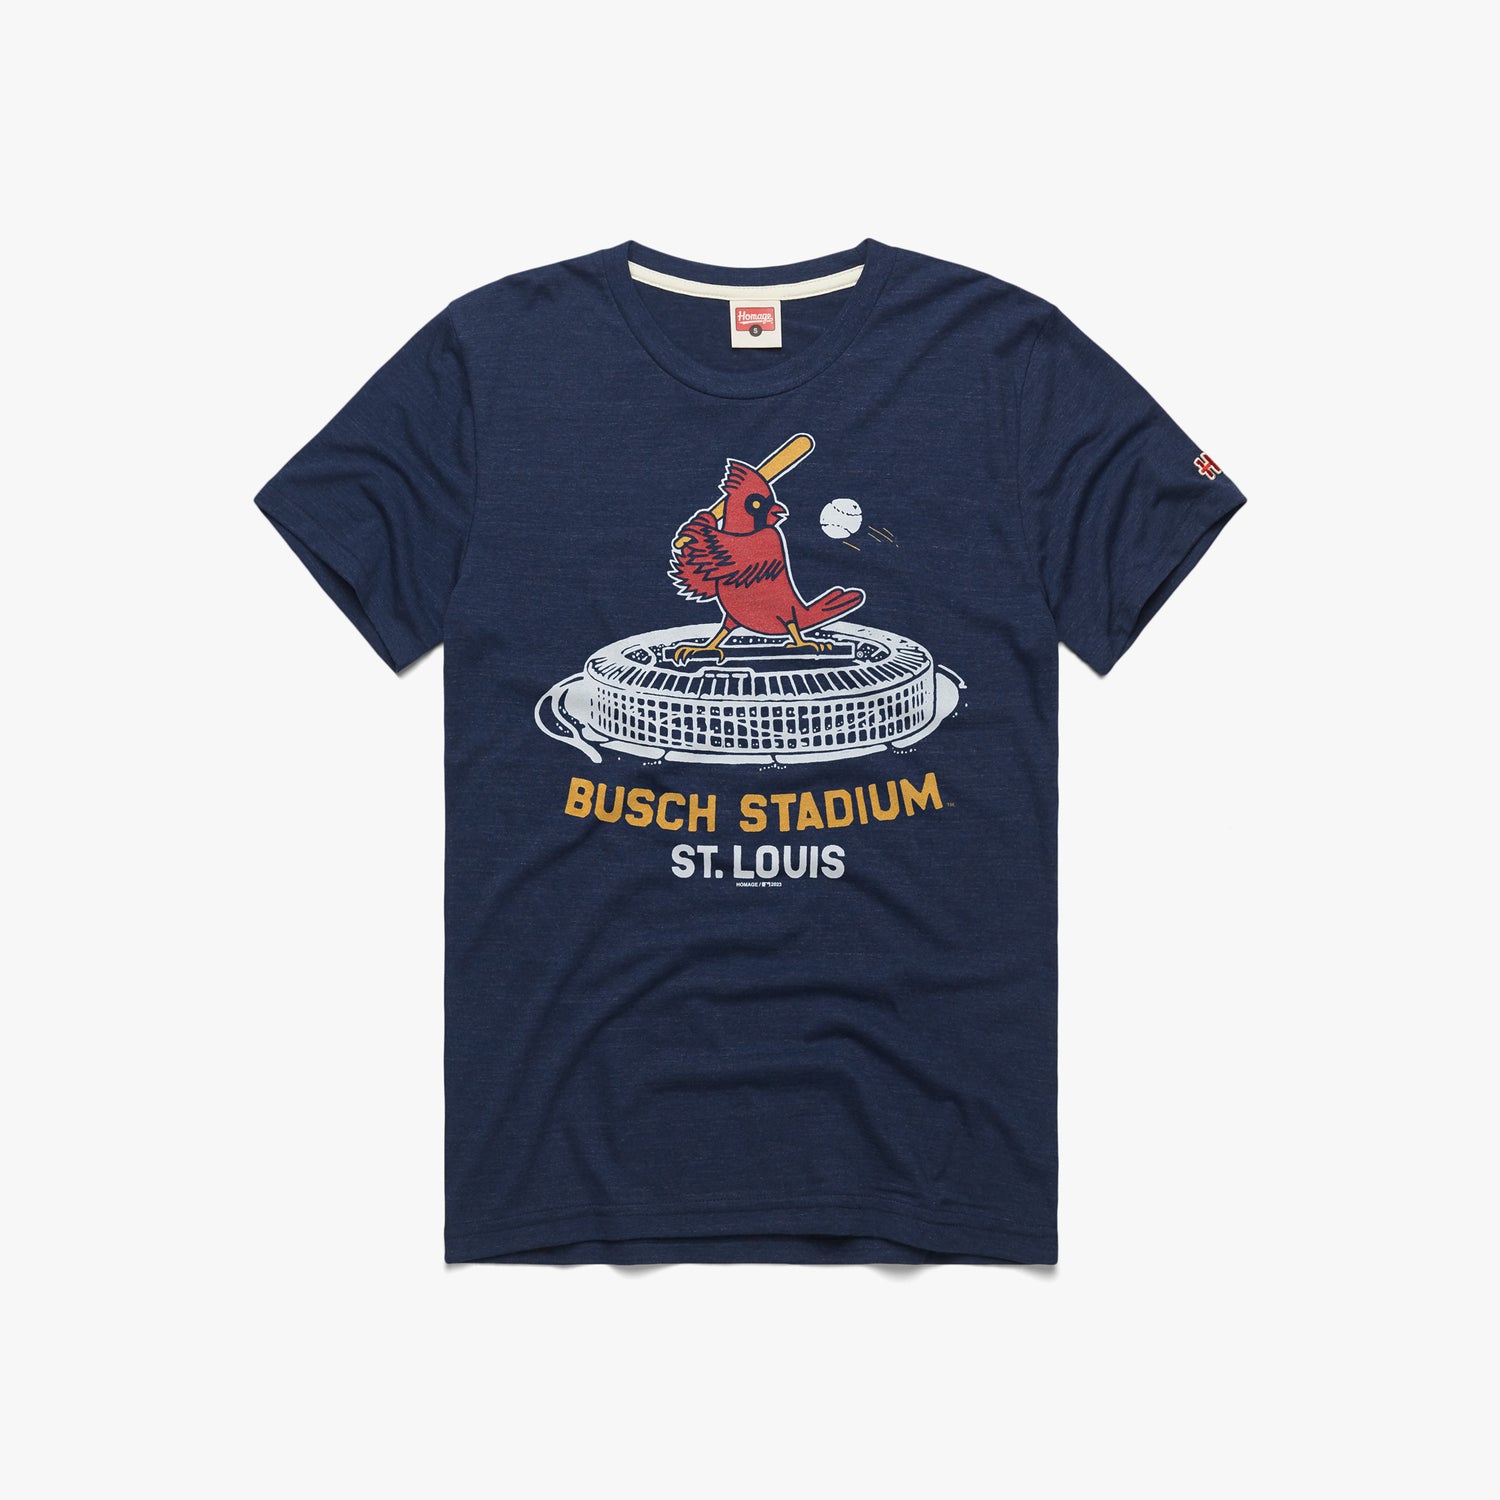 Goat Vintage Men's Upcycled St. Louis Cardinals T-Shirt in Red - Size Medium